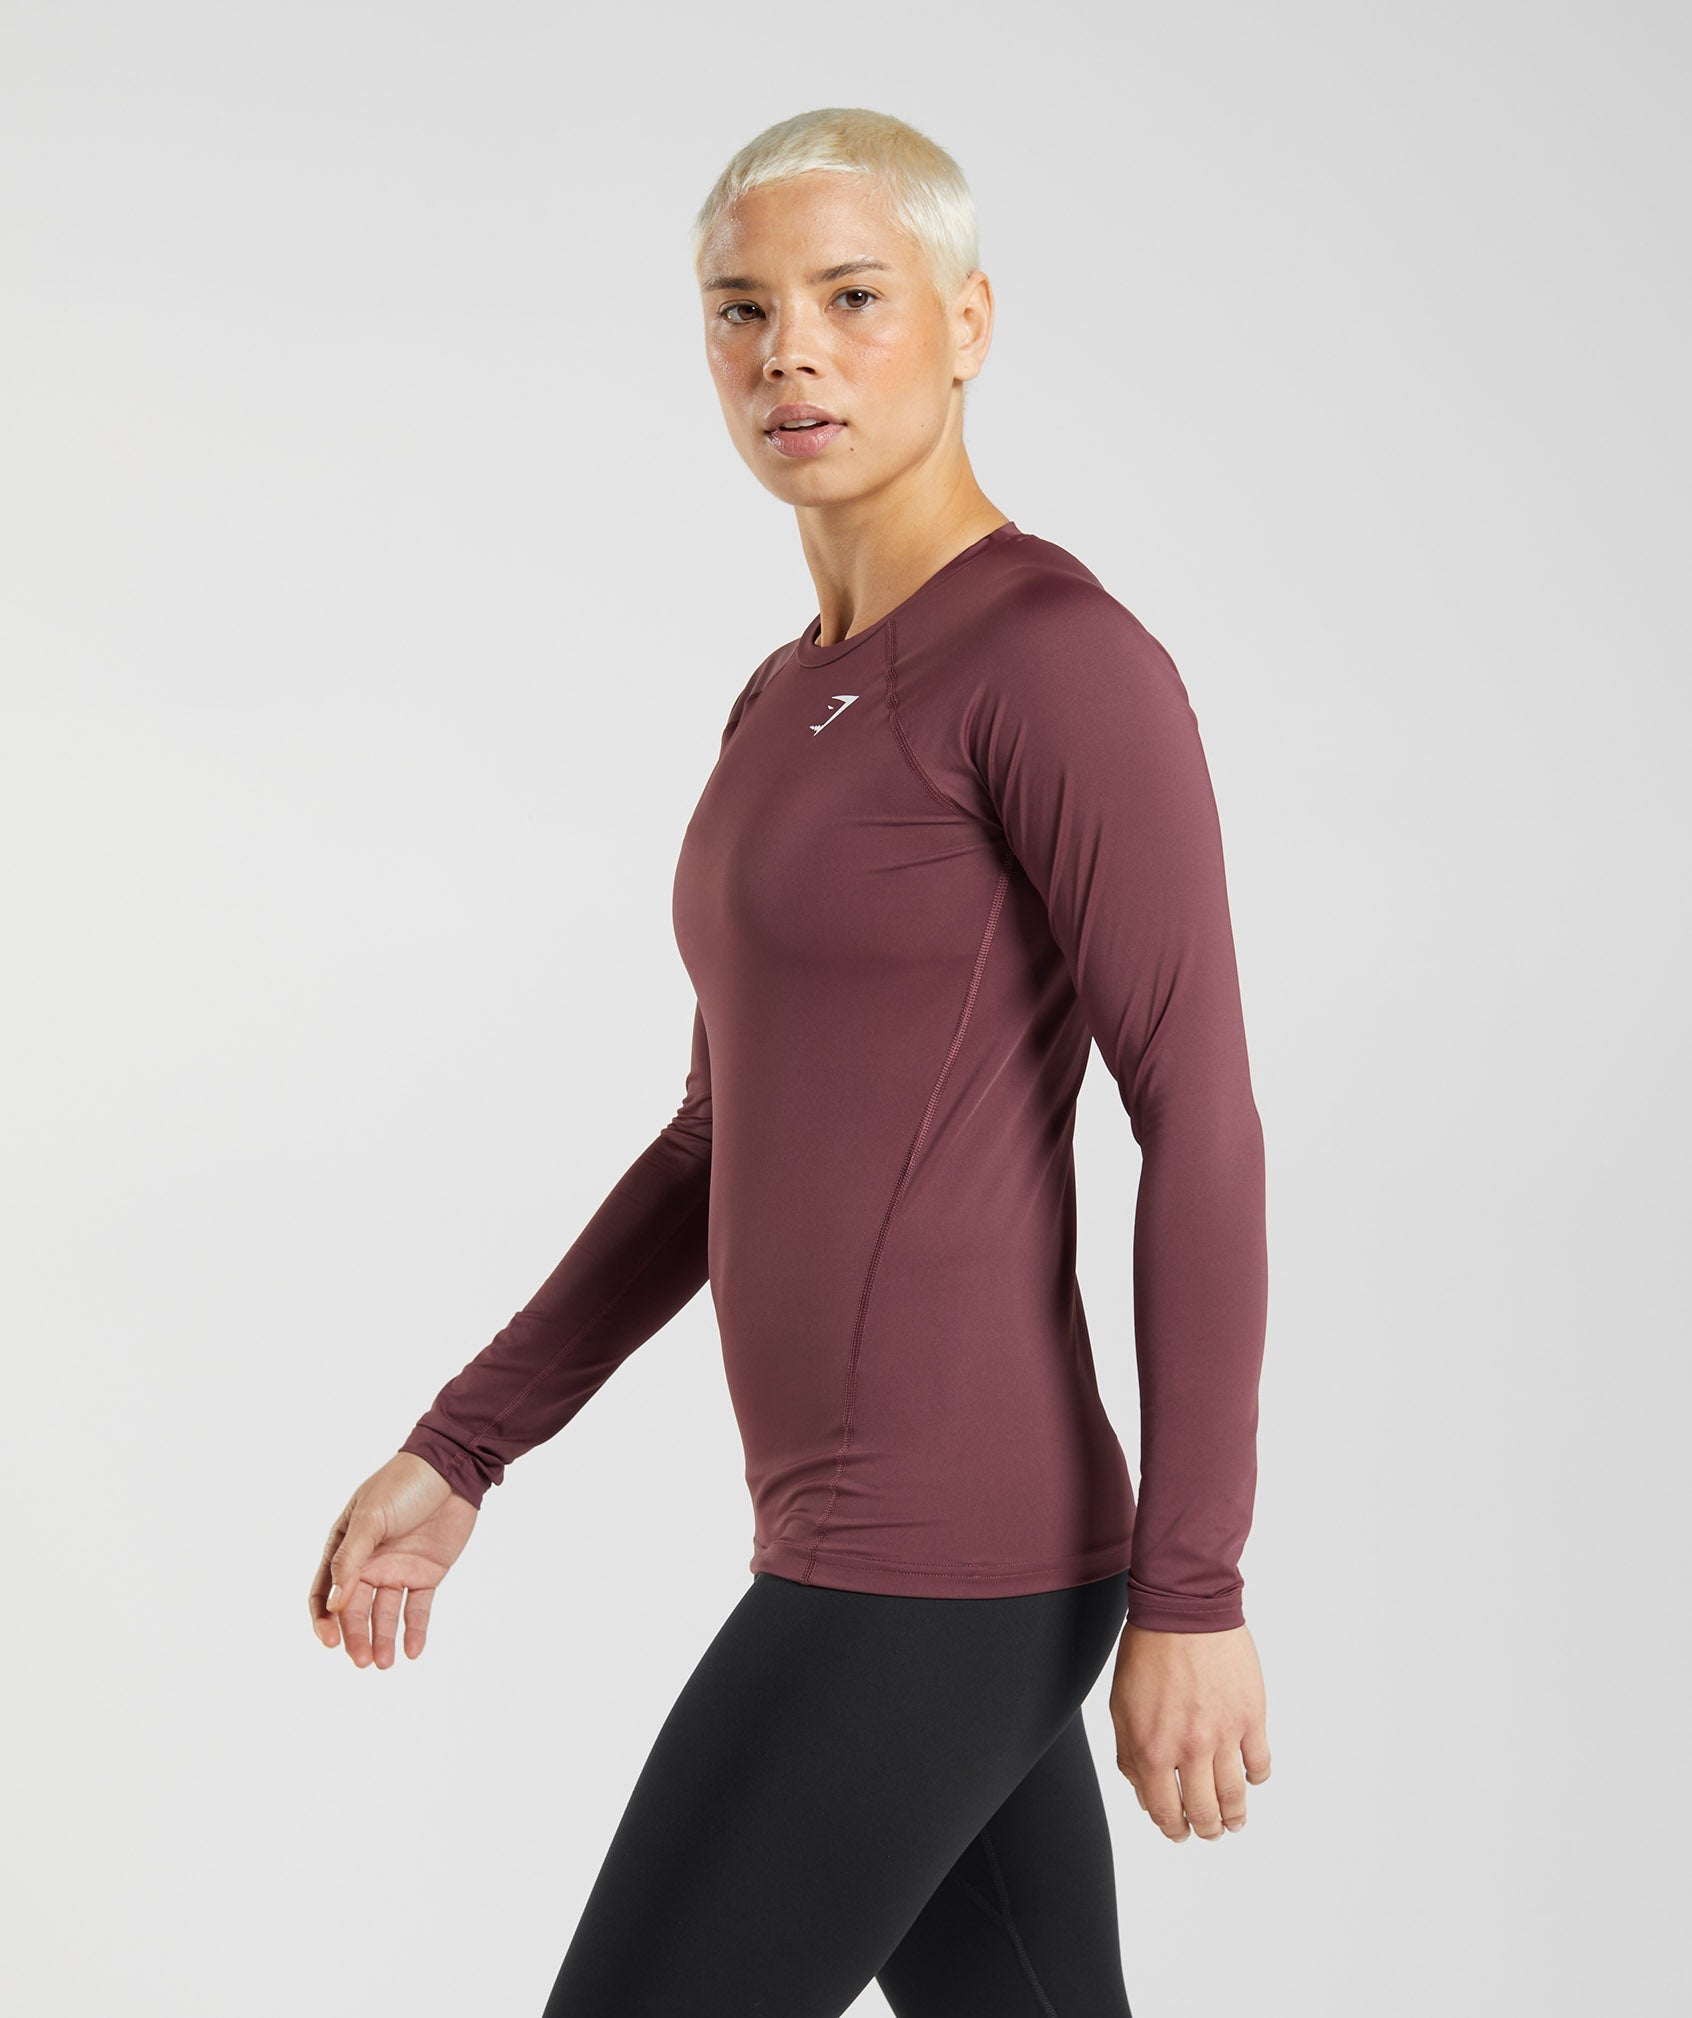 Training Baselayer Long Sleeve Top in Cherry Brown - view 3